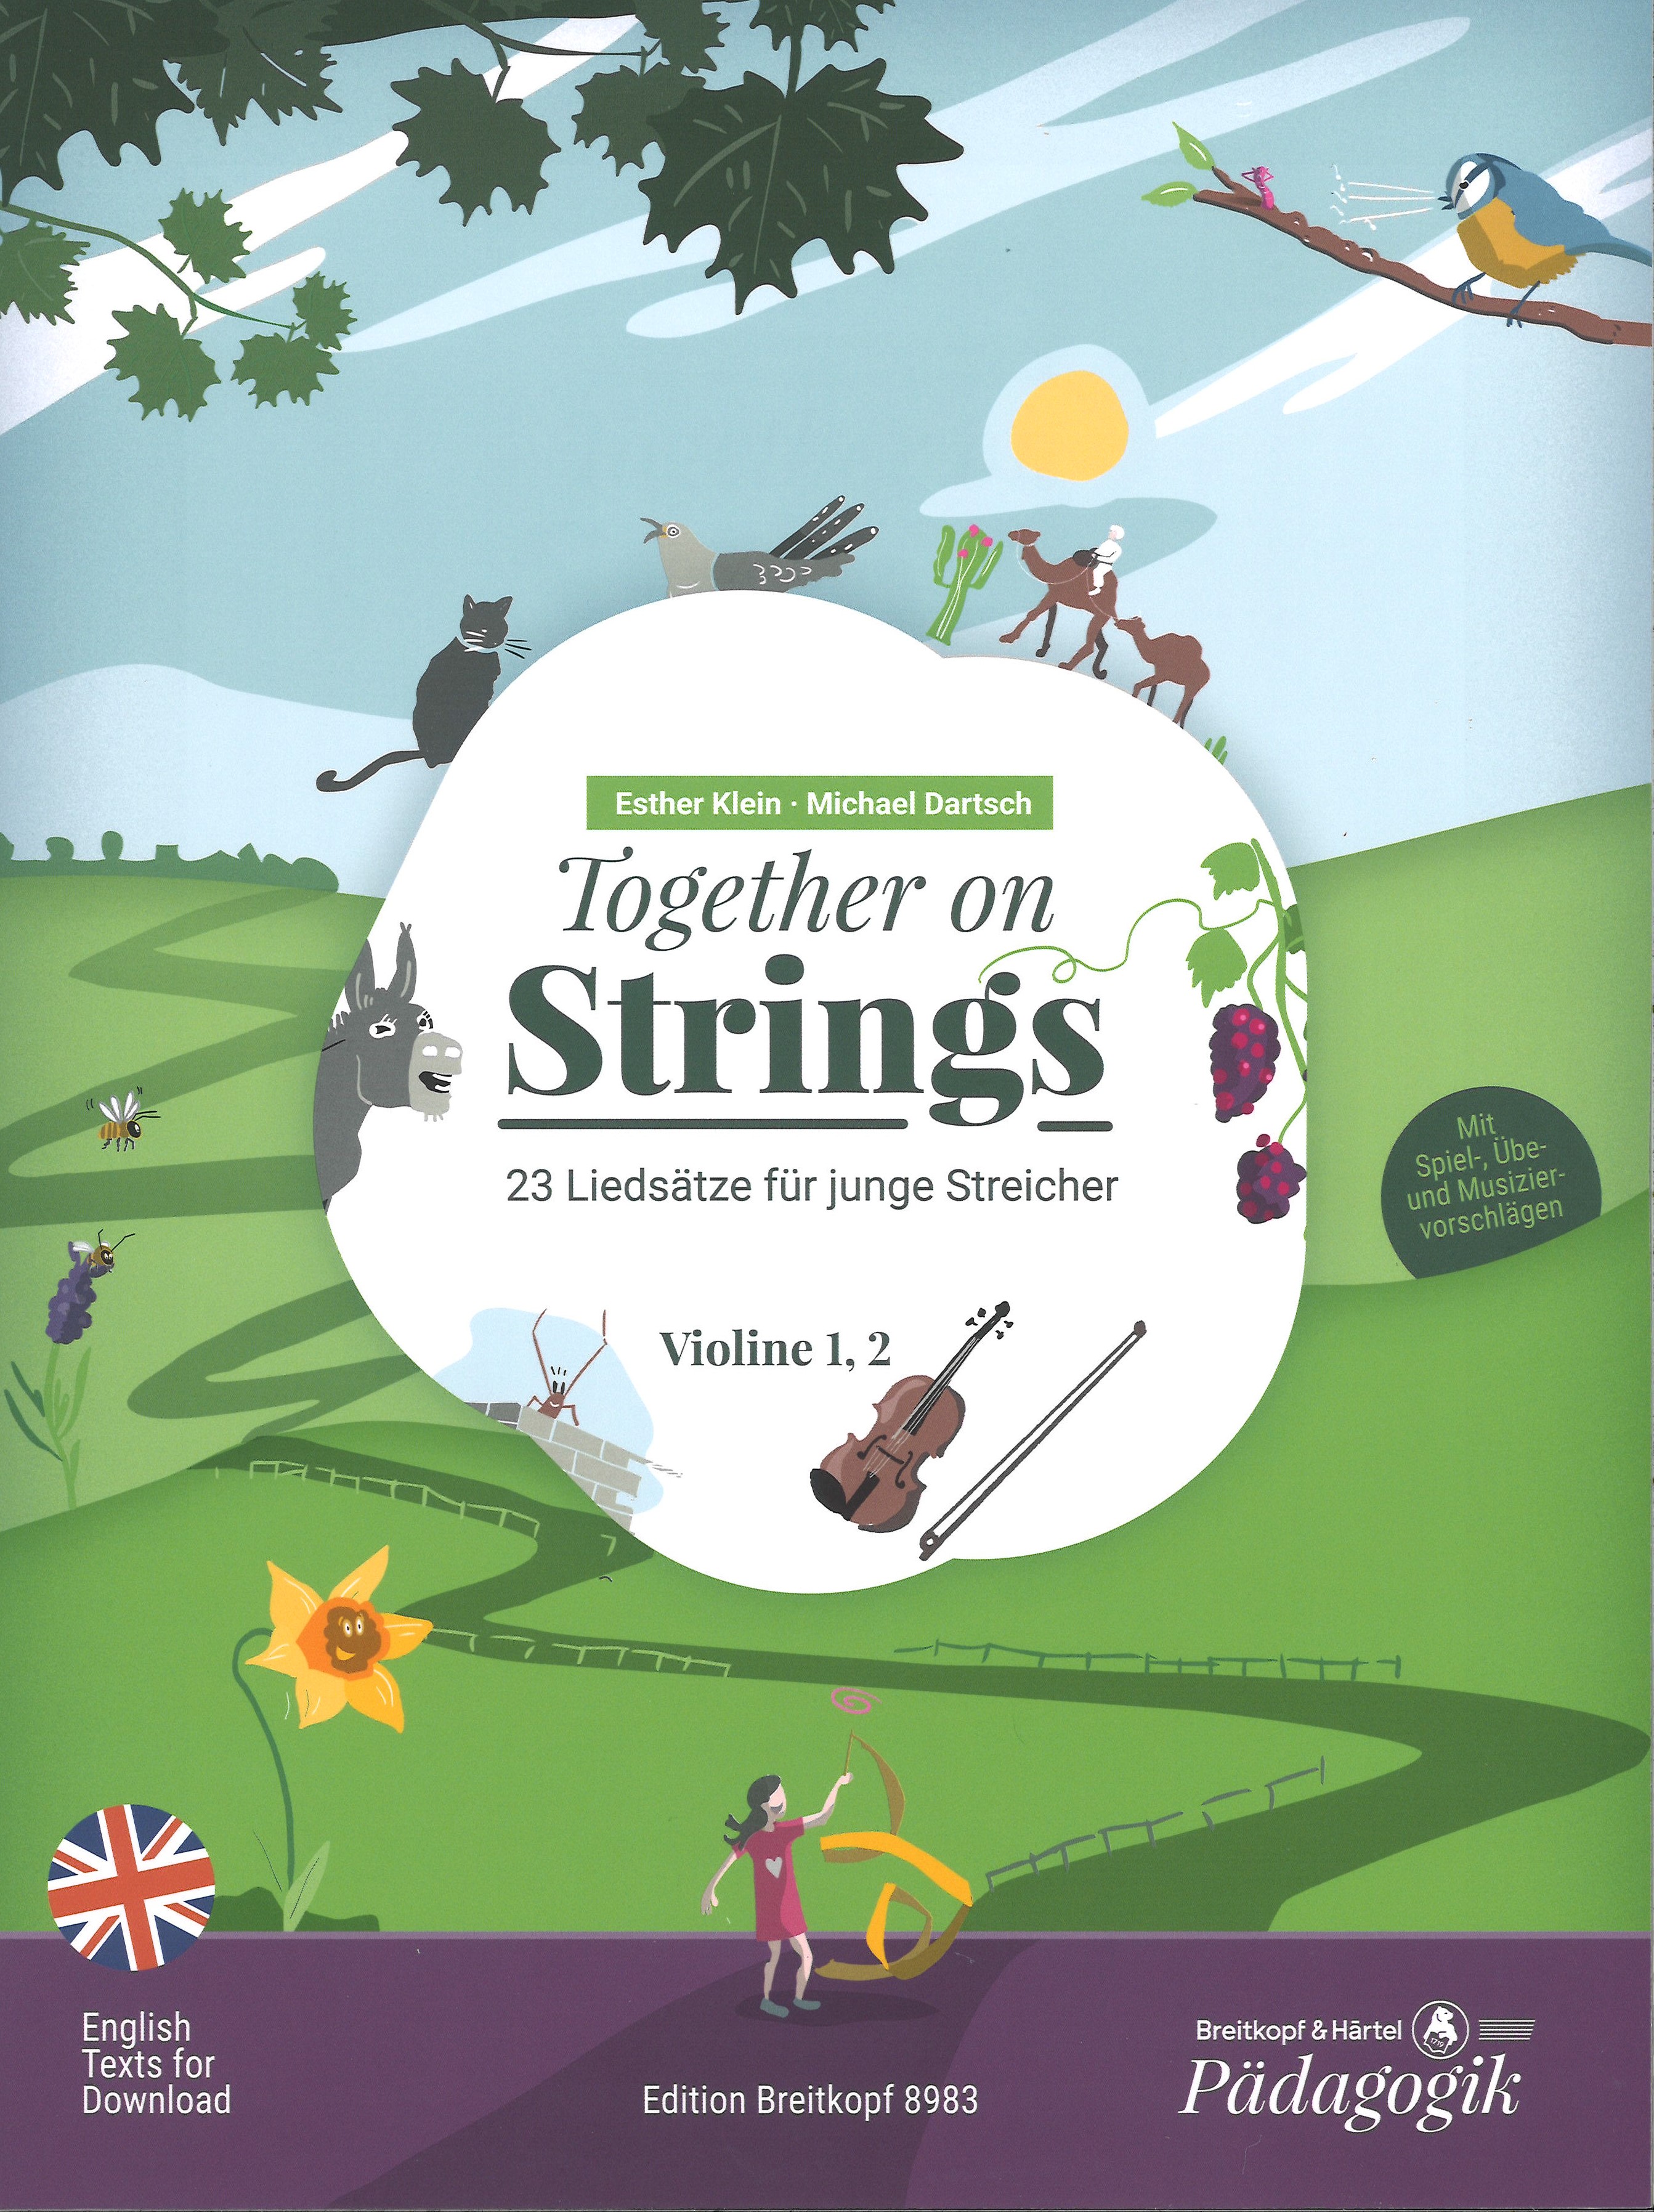 Together On Strings Violin 1 & 2 Sheet Music Songbook